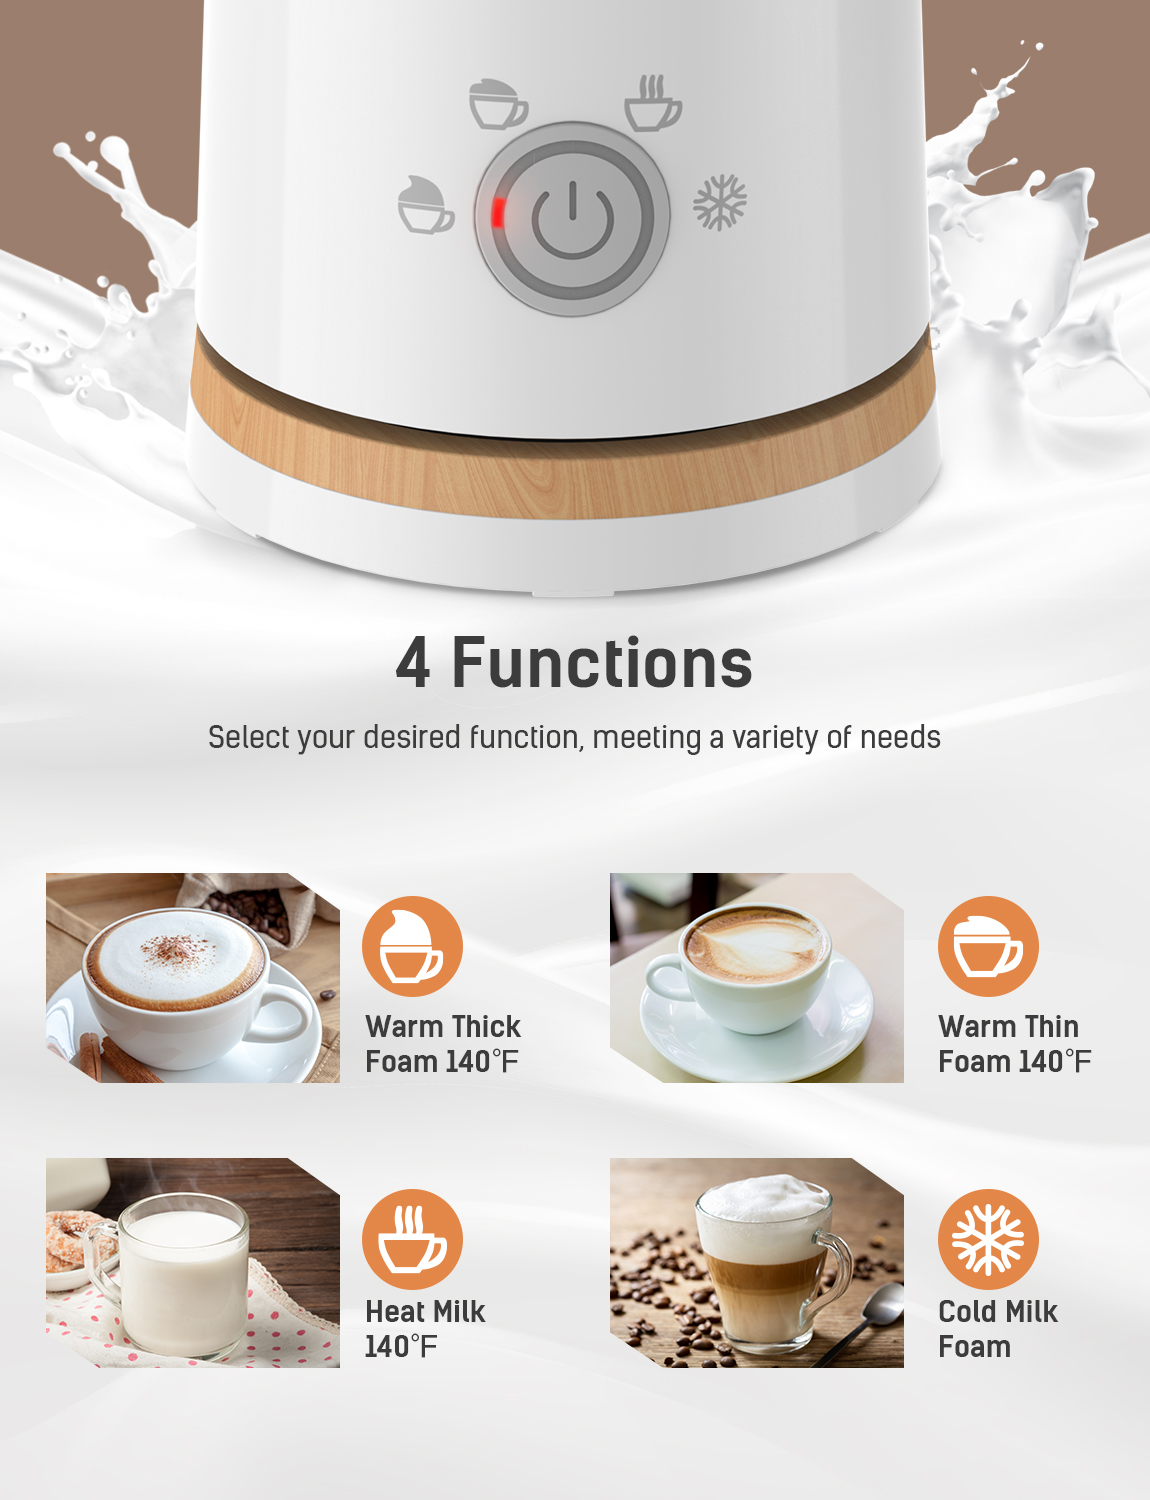 YISSVIC Milk Frother Electric Milk Steamer Automatic Hot or Cold Milk Foam  Maker for Capuccino Chocolate Latte (150ML) – YISSVIC